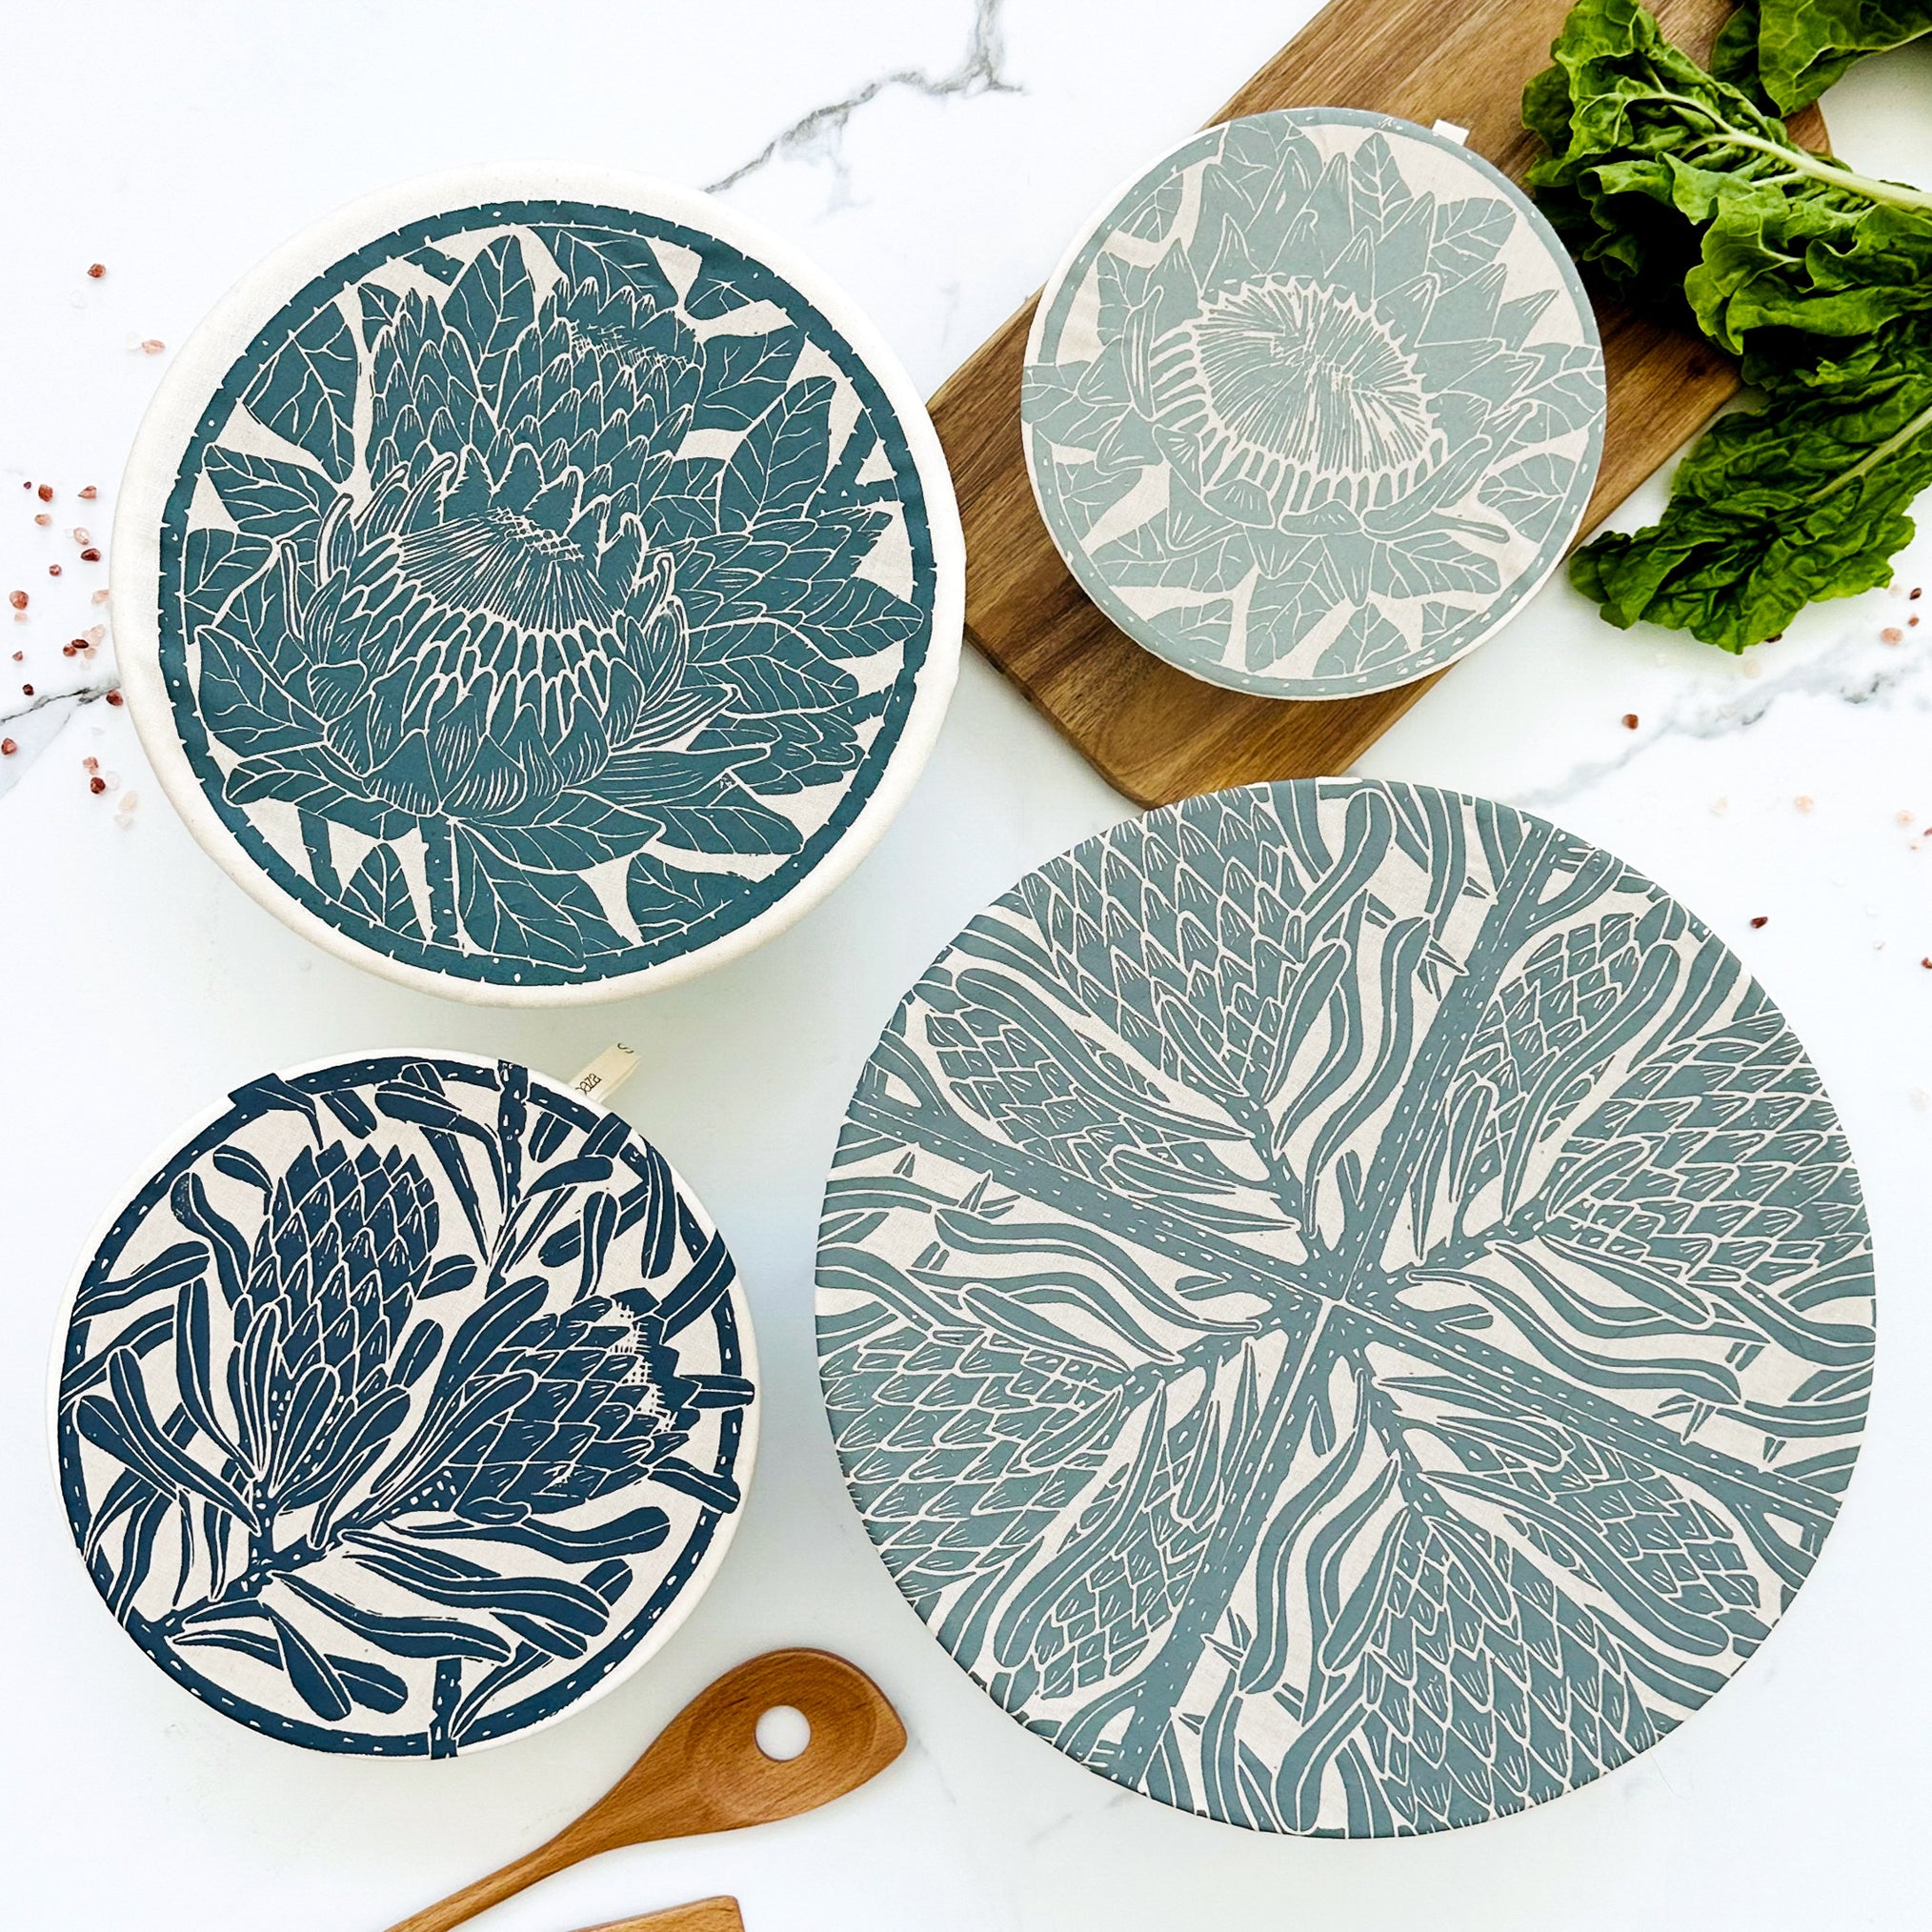 Dish and Bowl Cover Set of 4 Protea Print | cloth bowl covers in 4 sizes